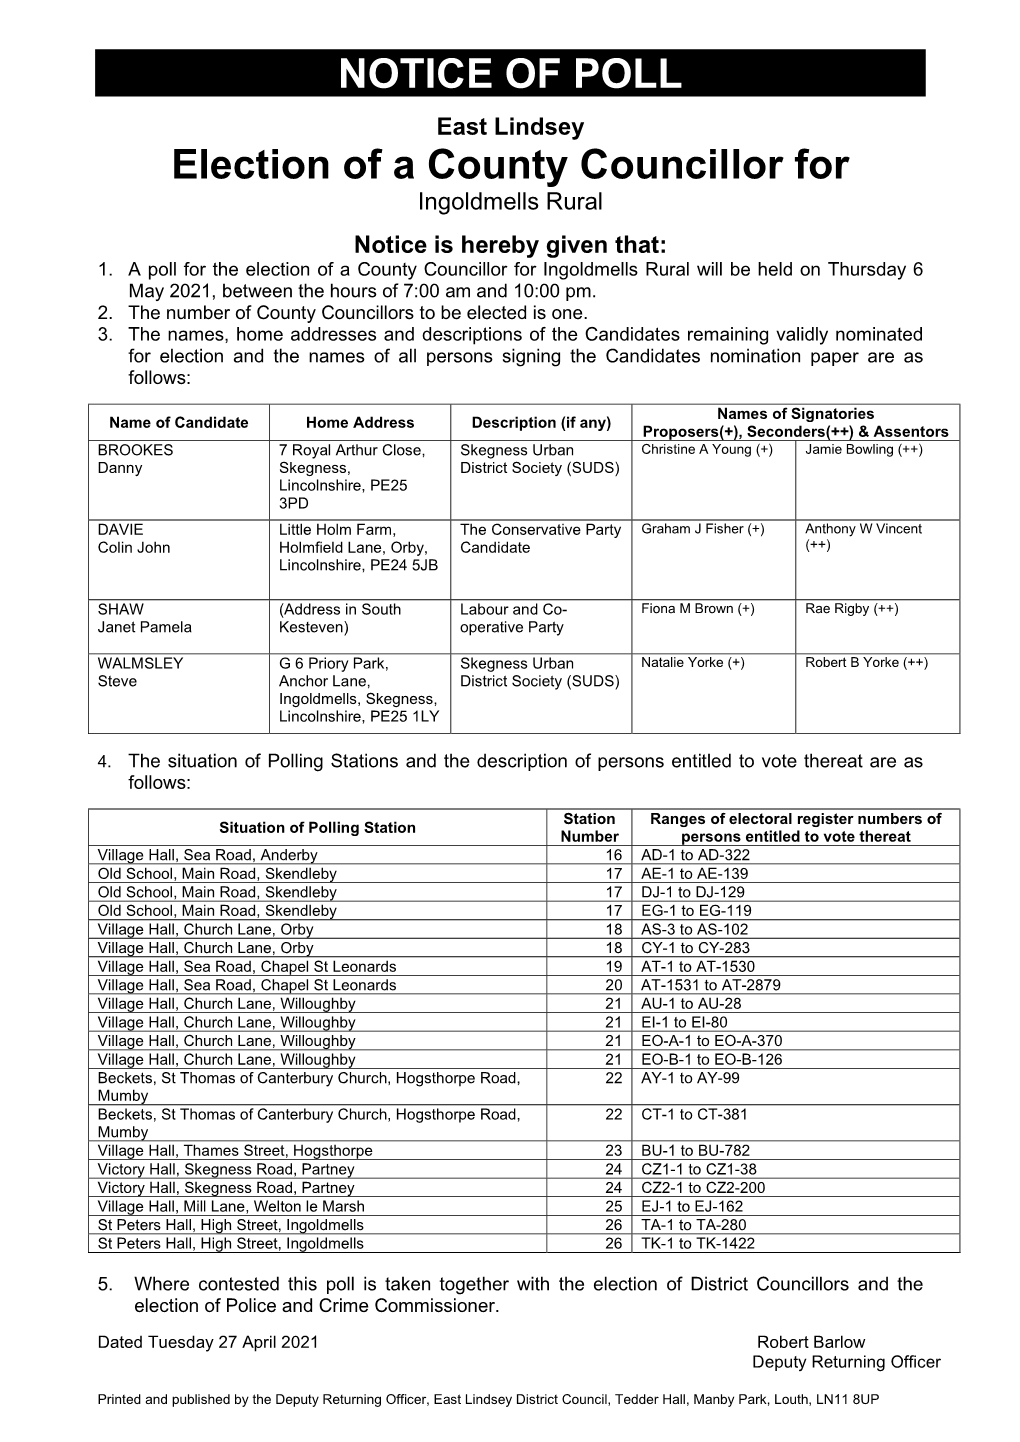 Candidates Remaining Validly Nominated for Election and the Names of All Persons Signing the Candidates Nomination Paper Are As Follows